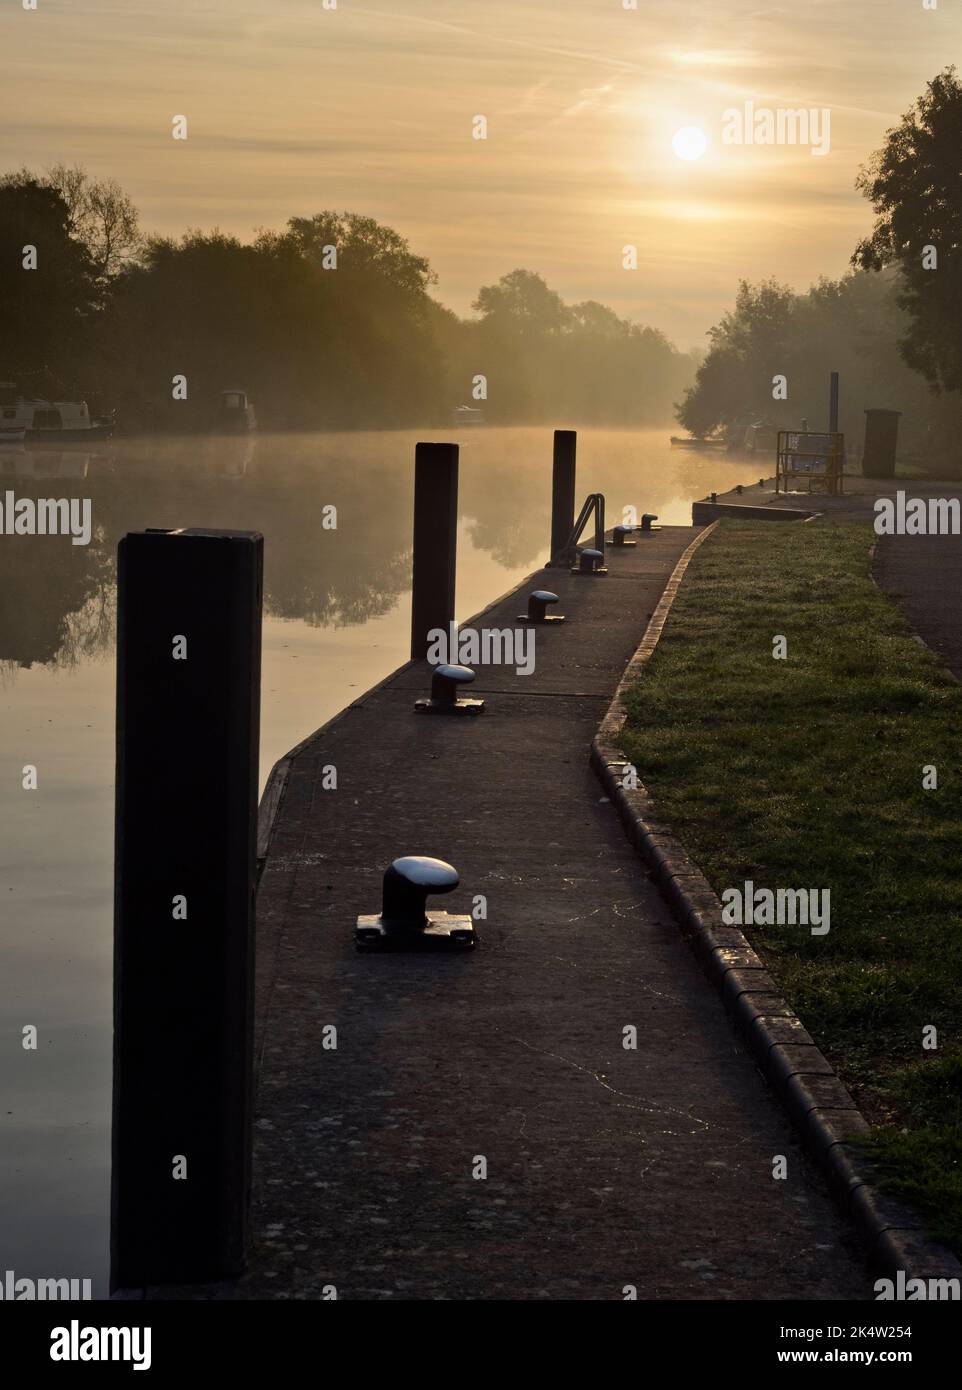 Close-up of mooring post by Abingdon lock gates on a luminous, misty Autumn sunrise; these scenic locks are on the River Thames just upstream of Abing Stock Photo